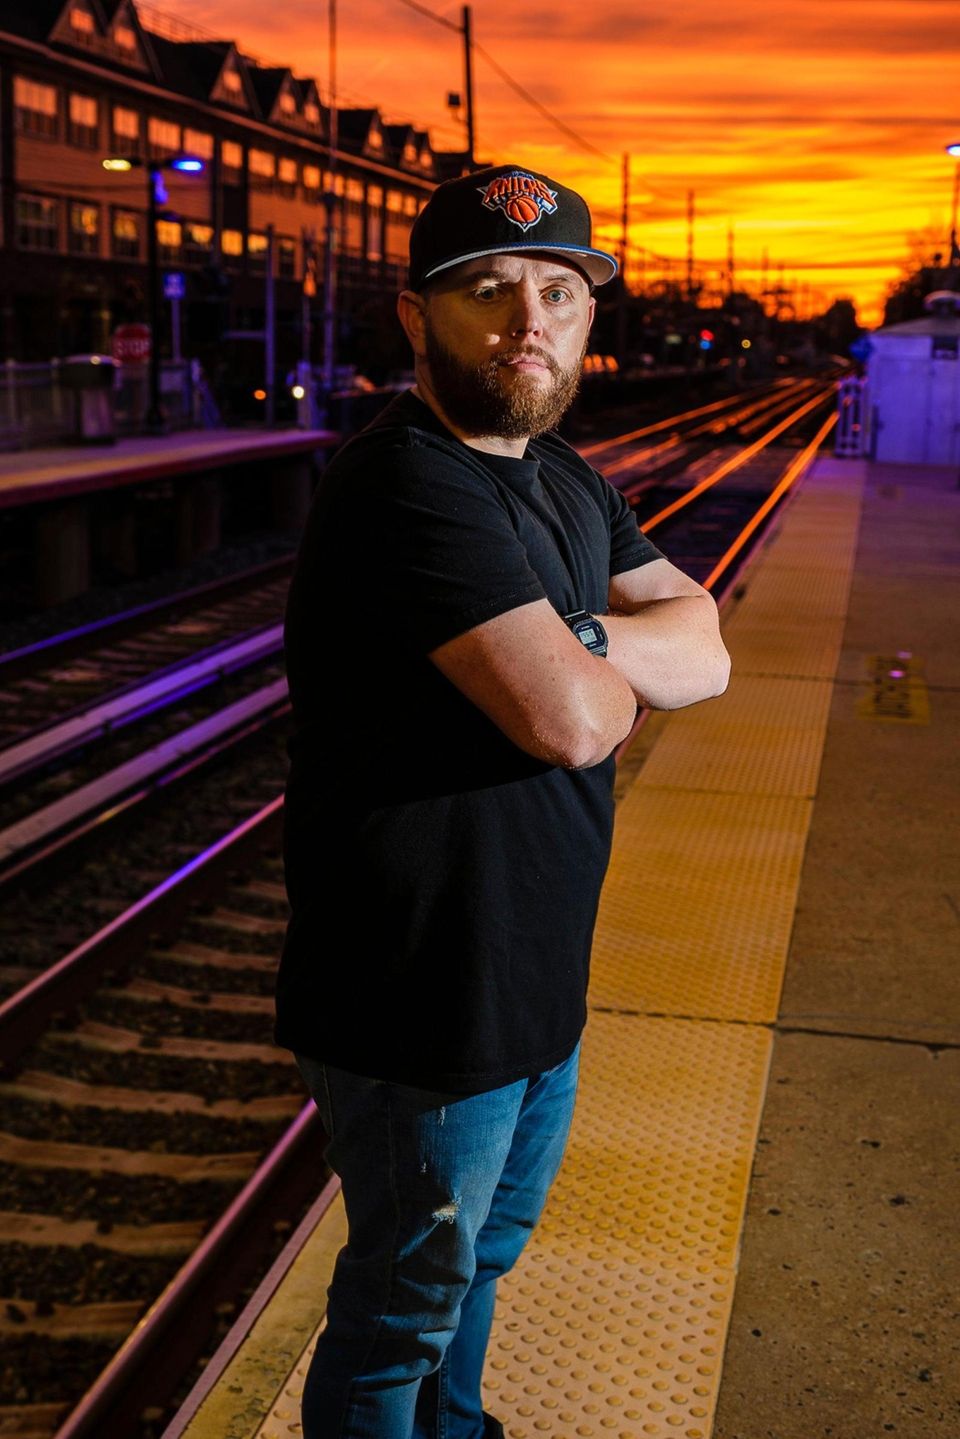 Edward Eder on the train platform with the